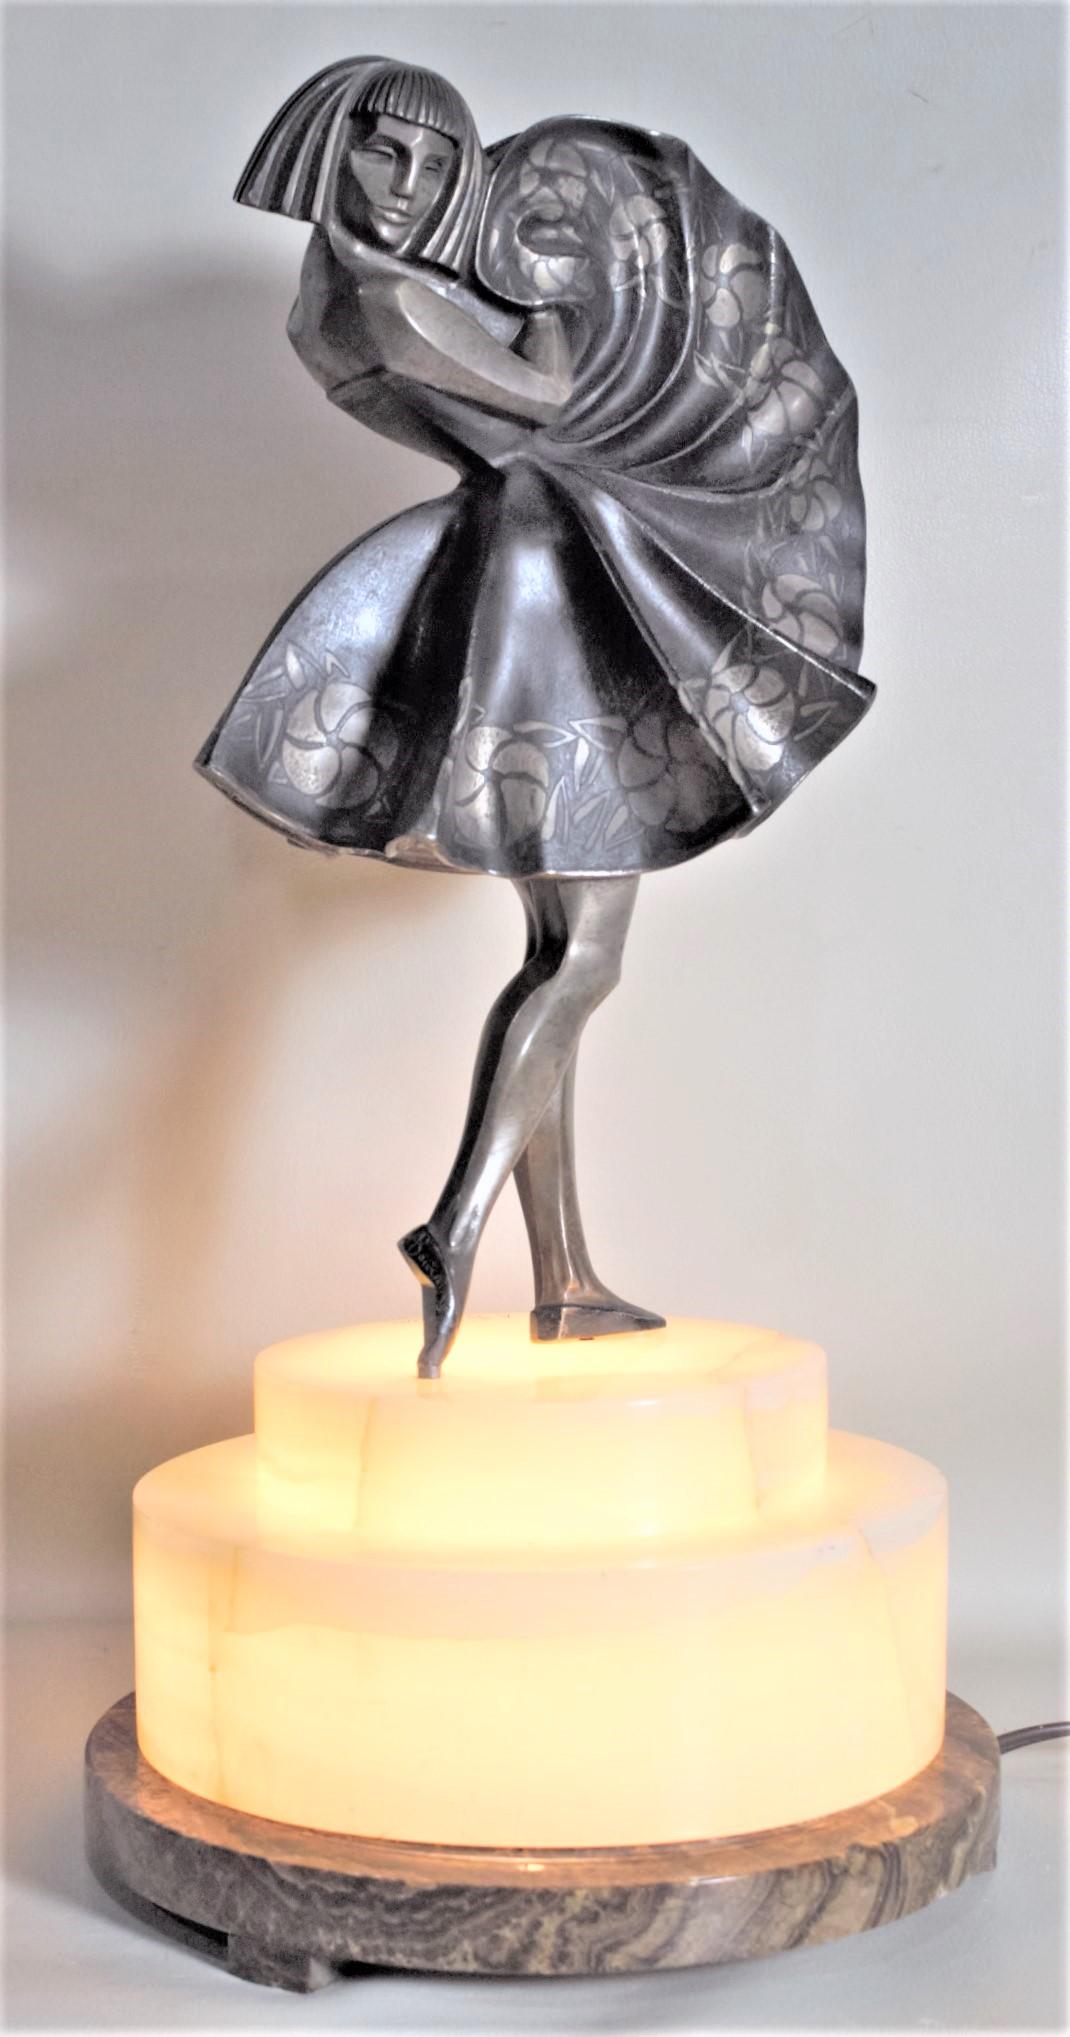 Marcel Andre Bouraine Art Deco Silvered Bronze Lighted Sculpture Dancing Girl In Good Condition For Sale In Hamilton, Ontario